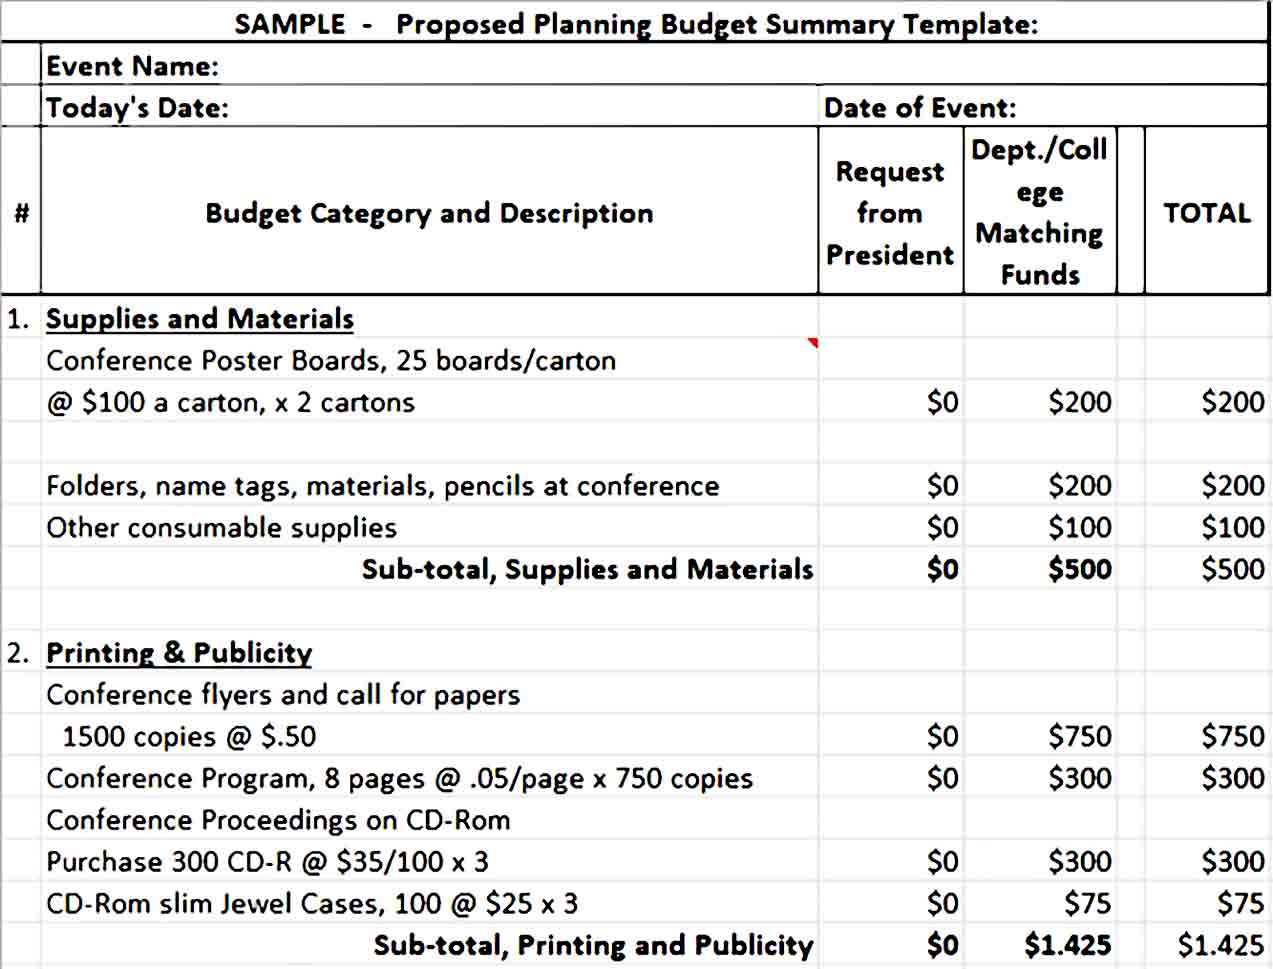 Sample Proposed Budget Planning Summary Template 1